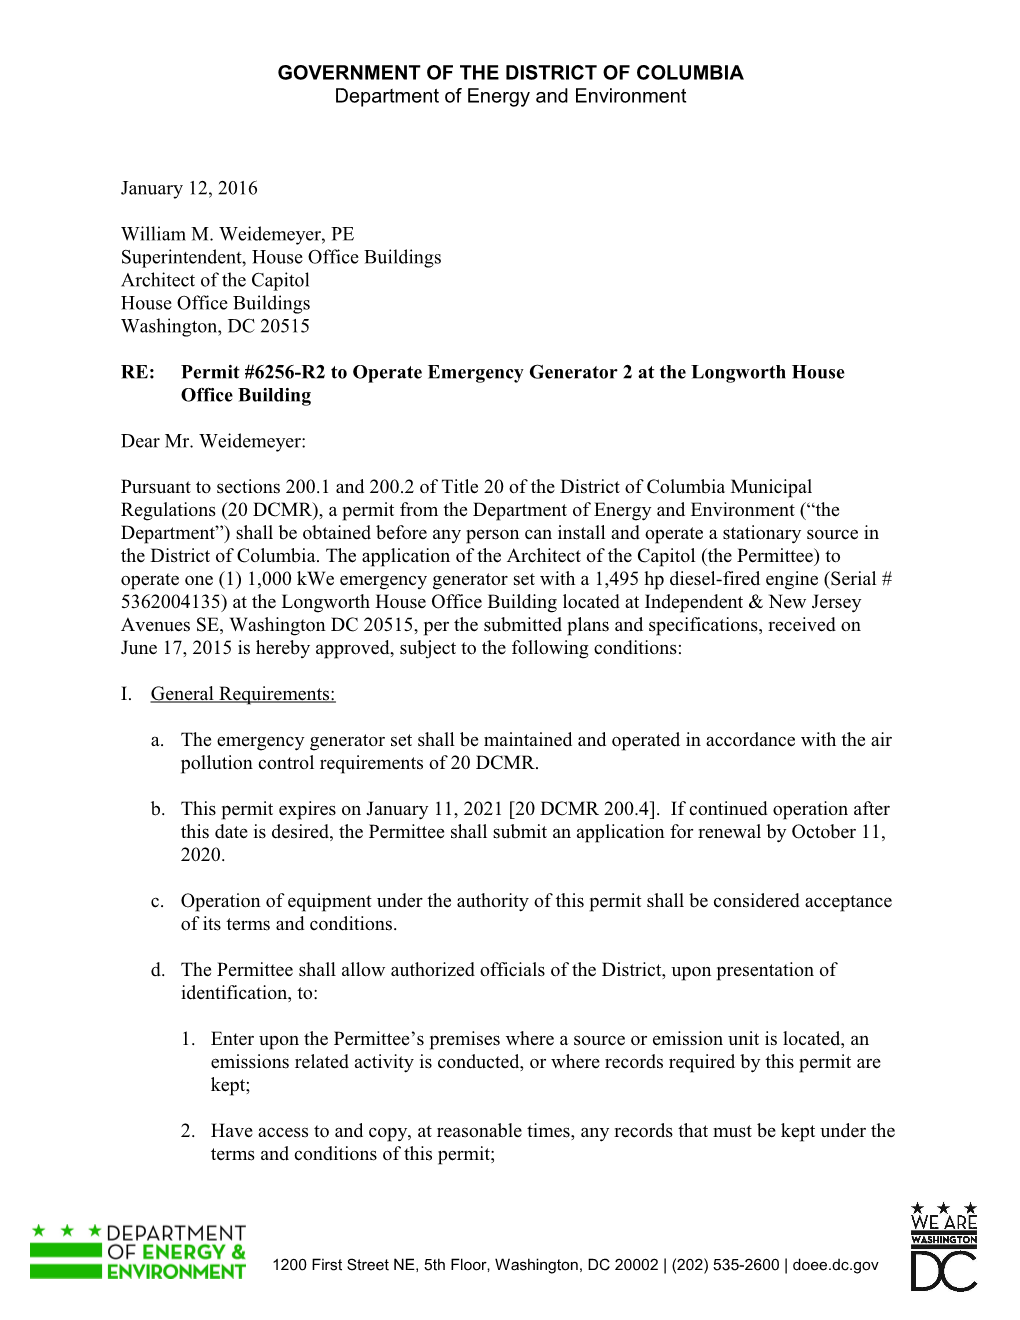 Permit #6256-R2 to Operate Emergency Generator2 at the Longworthhouse Office Building